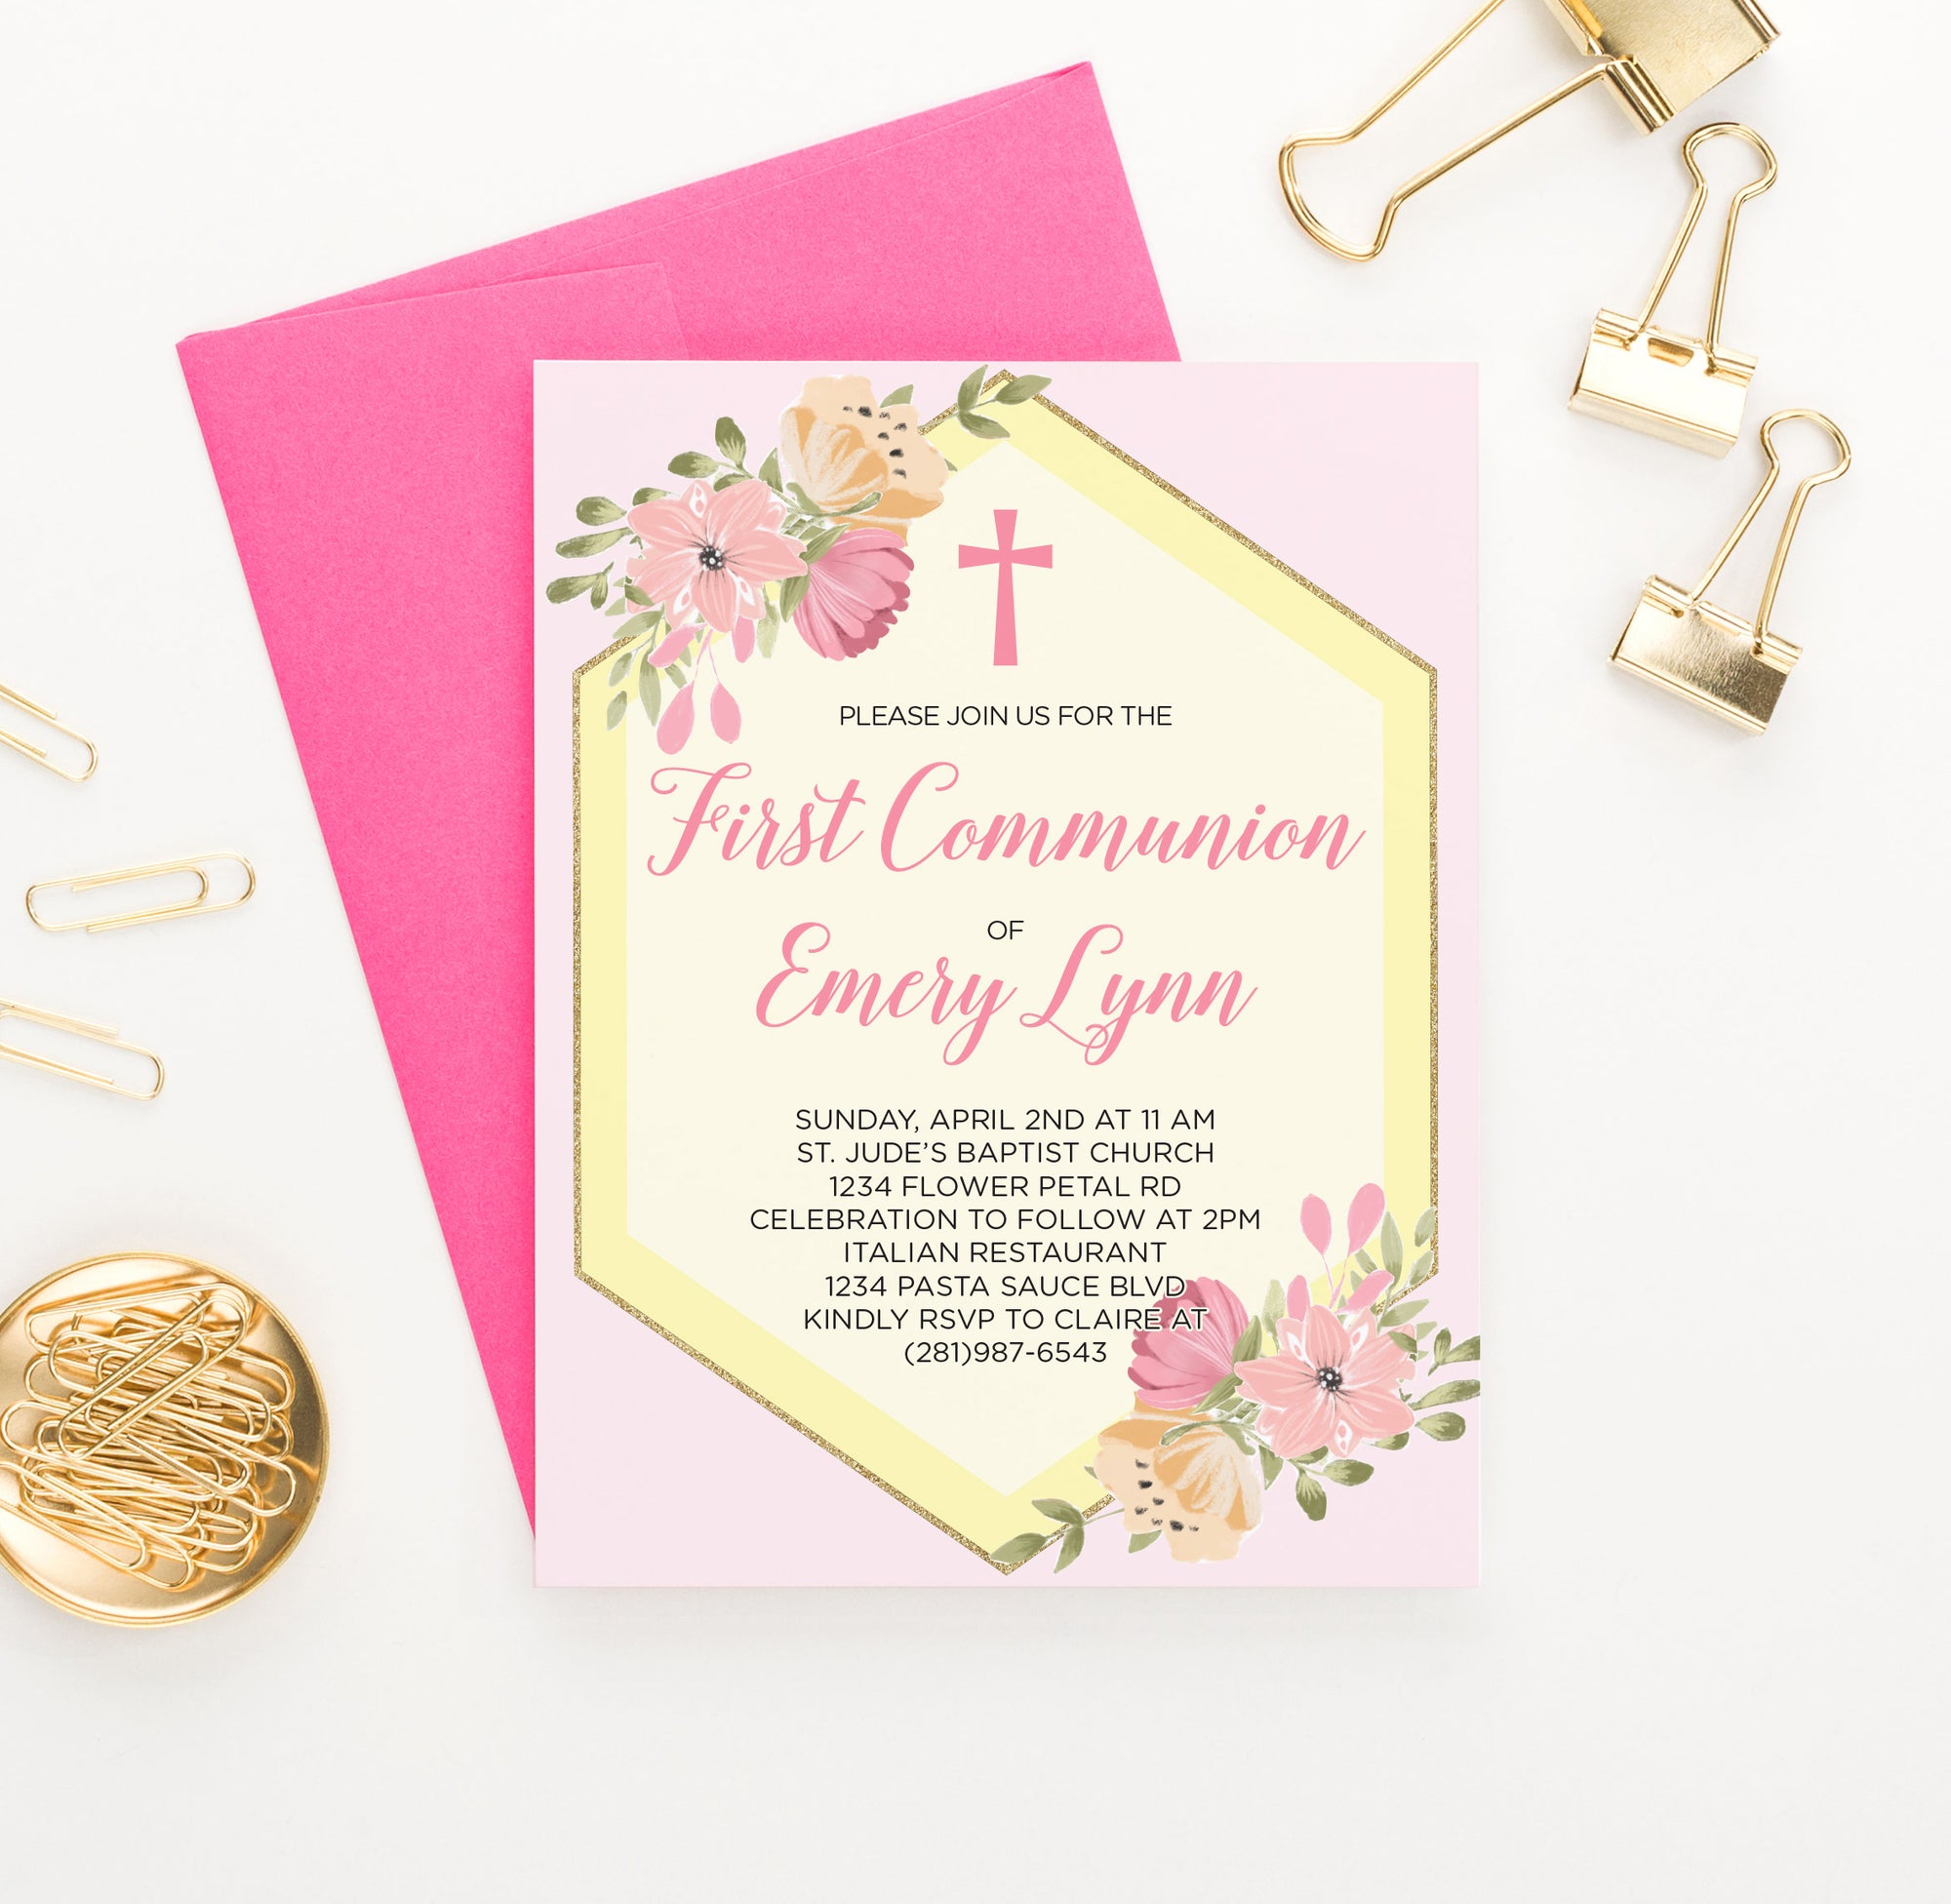 Personalized Pink And Yellow Communion Invitations Cards With Florals